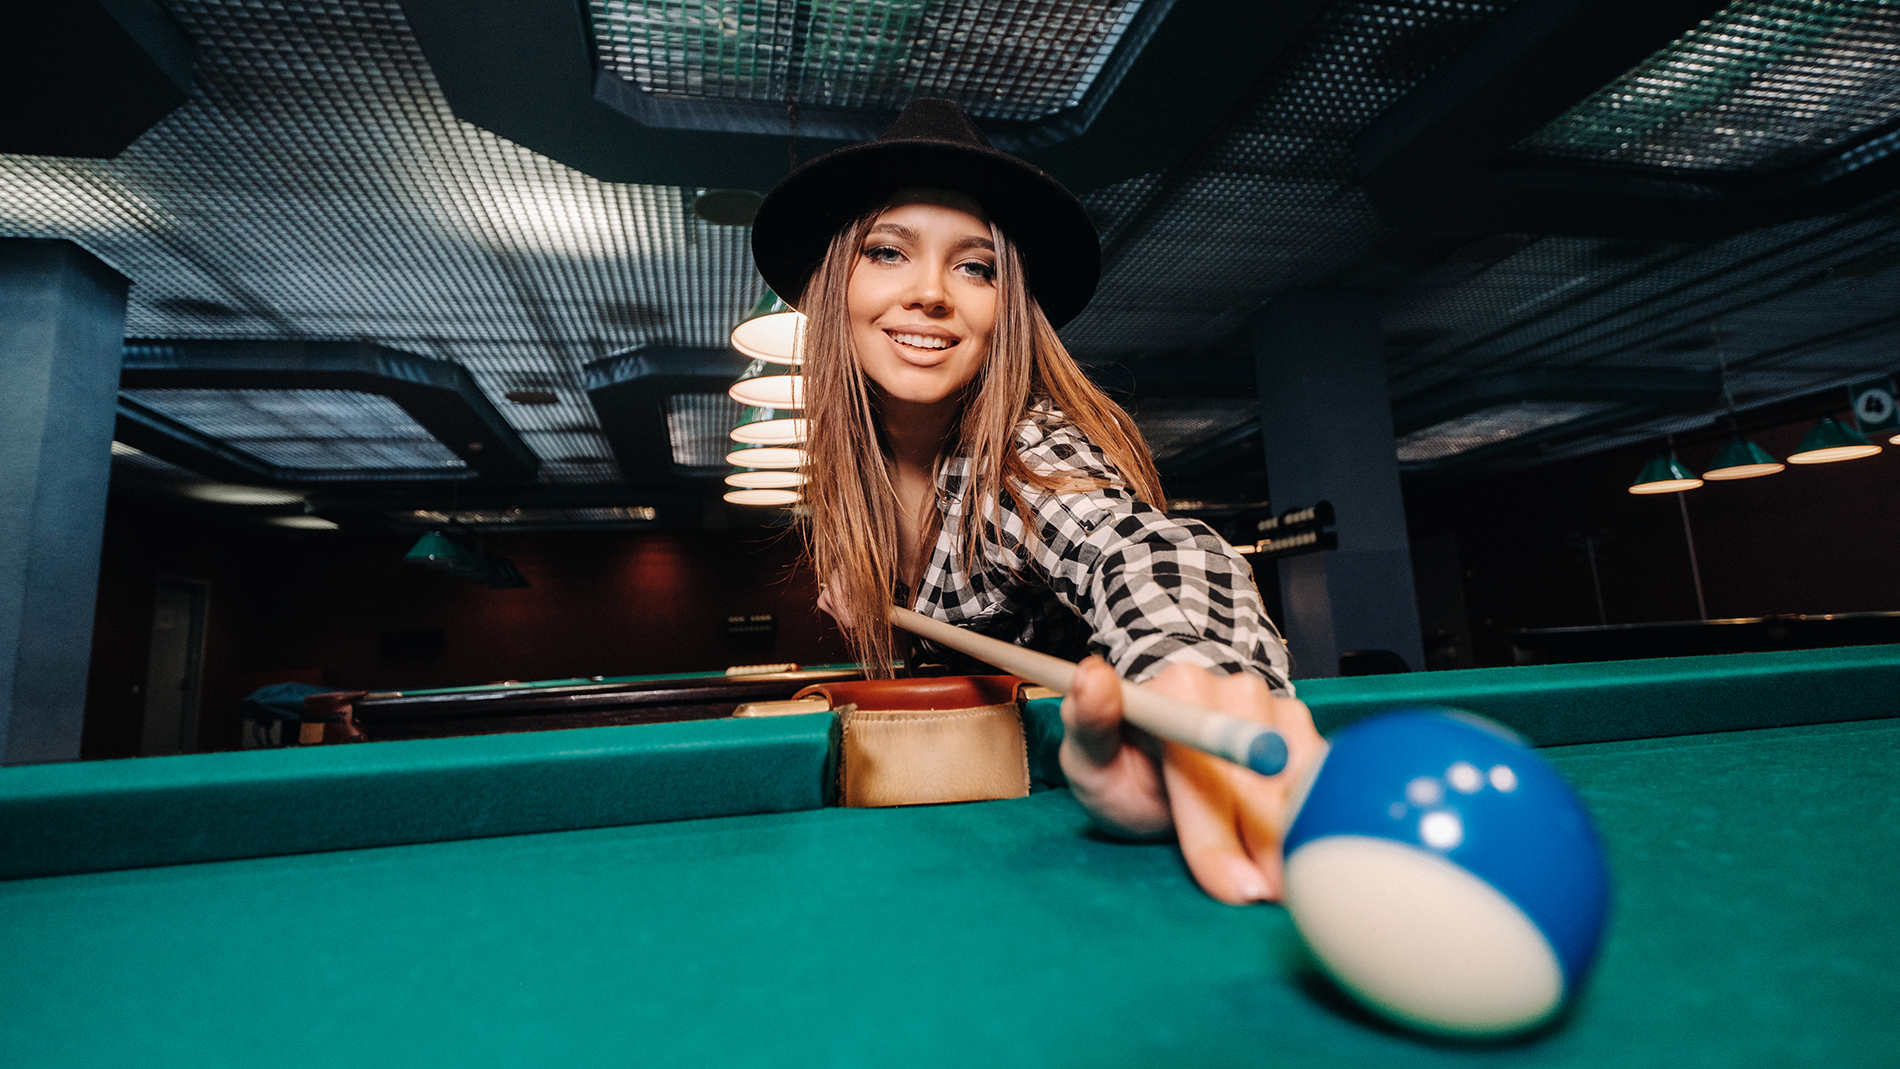 A girl in a hat in a billiard club with a cue in her hands hits a ball.Playing pool